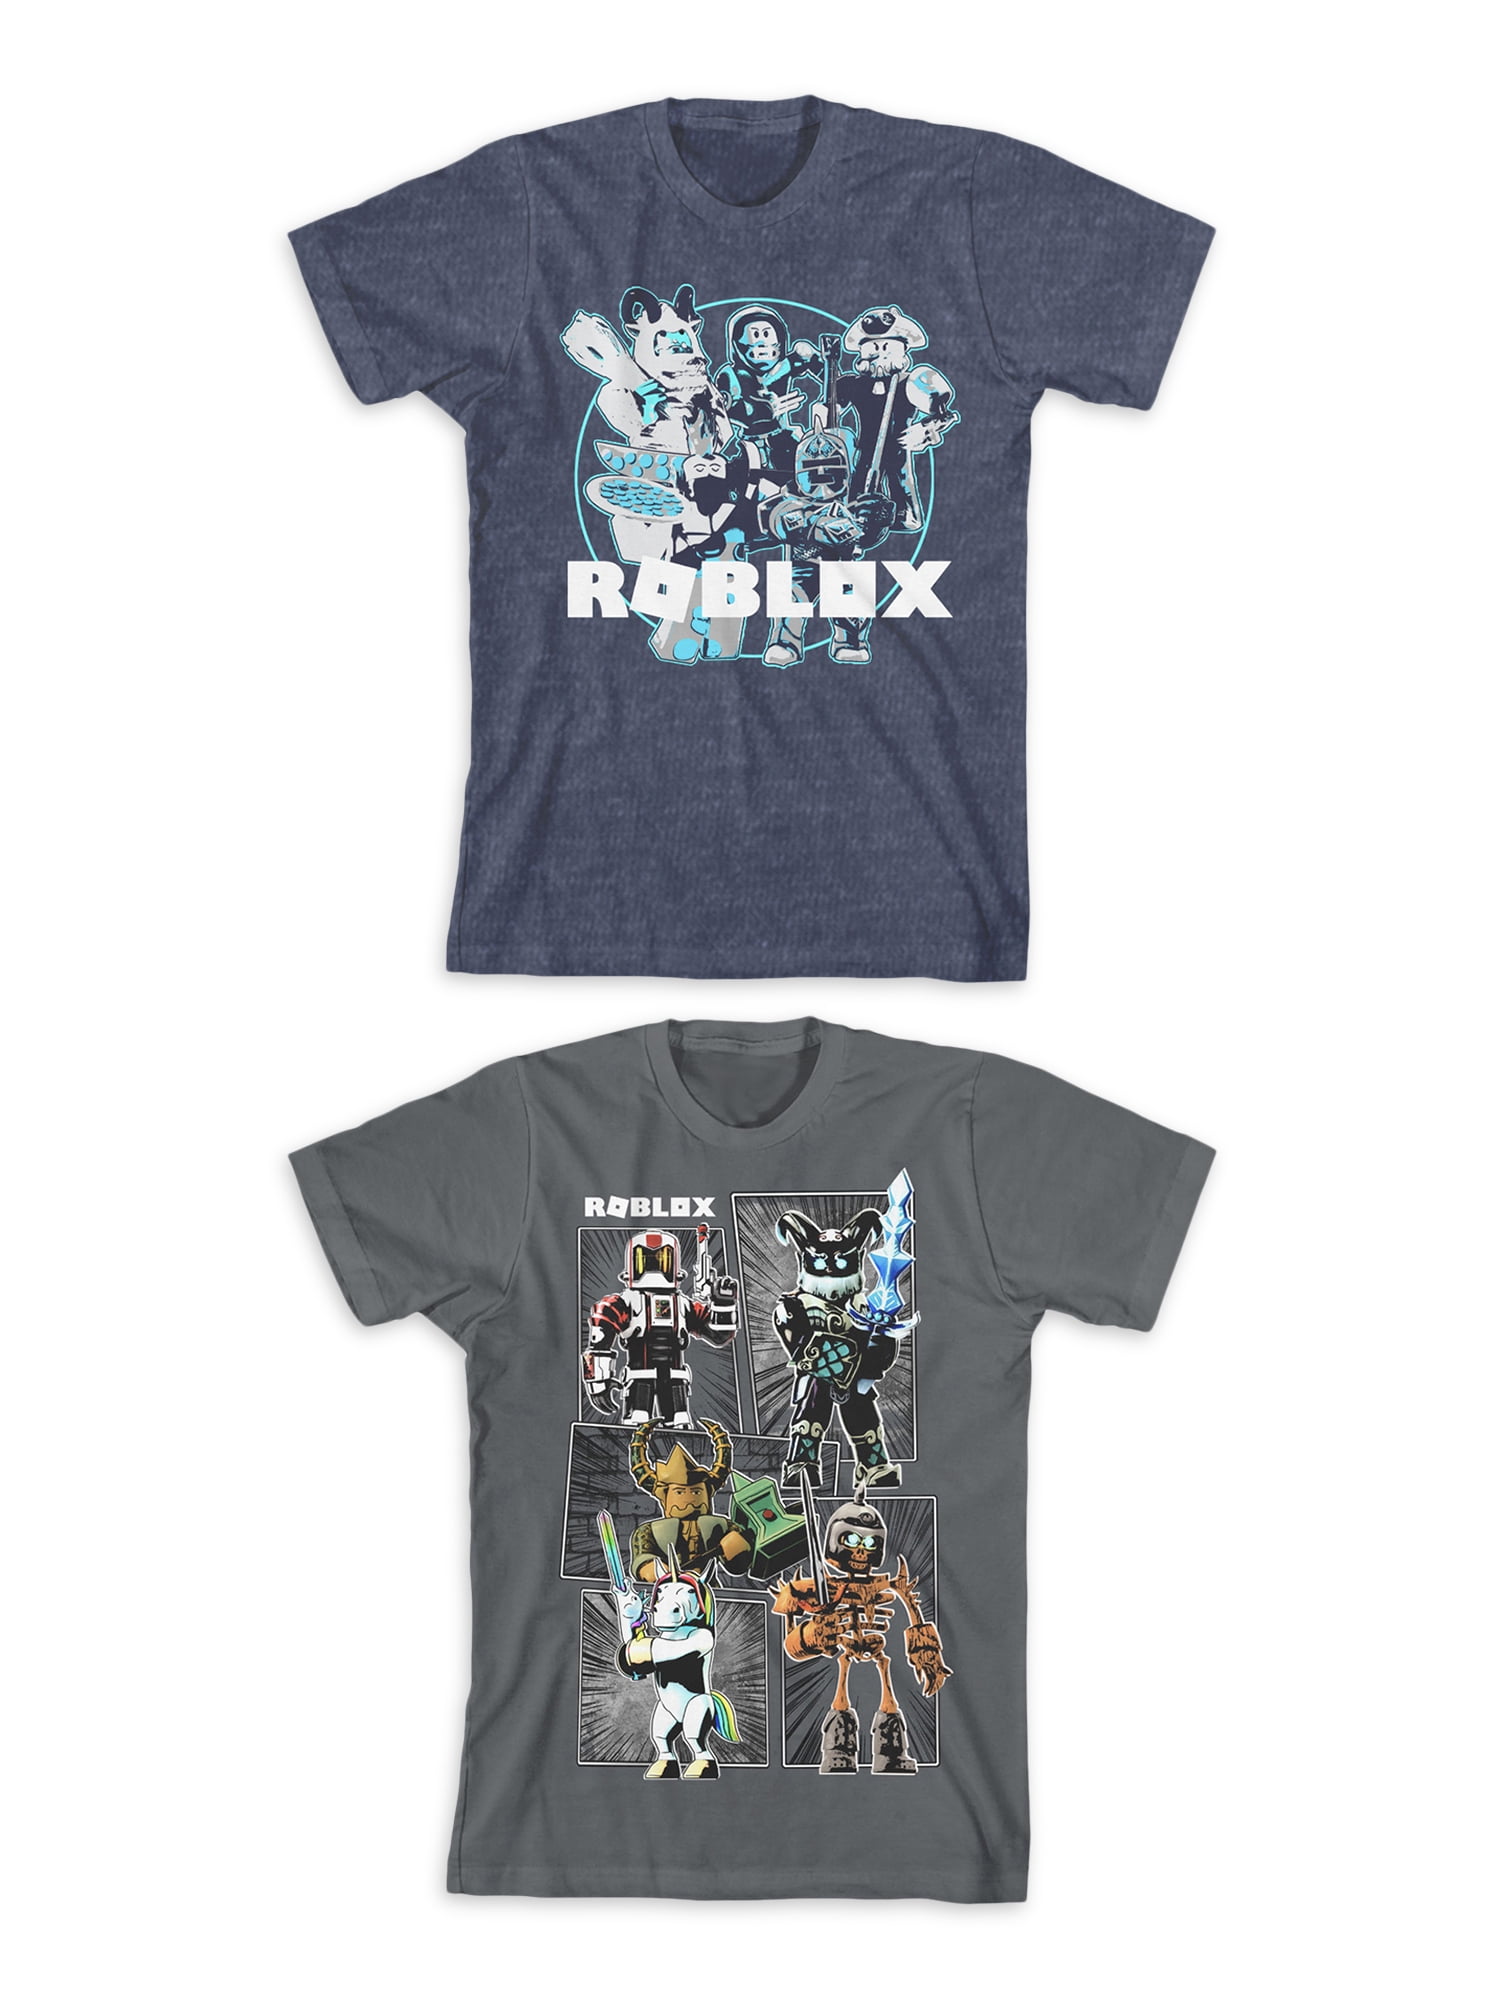 Boys Roblox Characters Graphic T-Shirt 2-Pack, Size 4-18 - Walmart.com